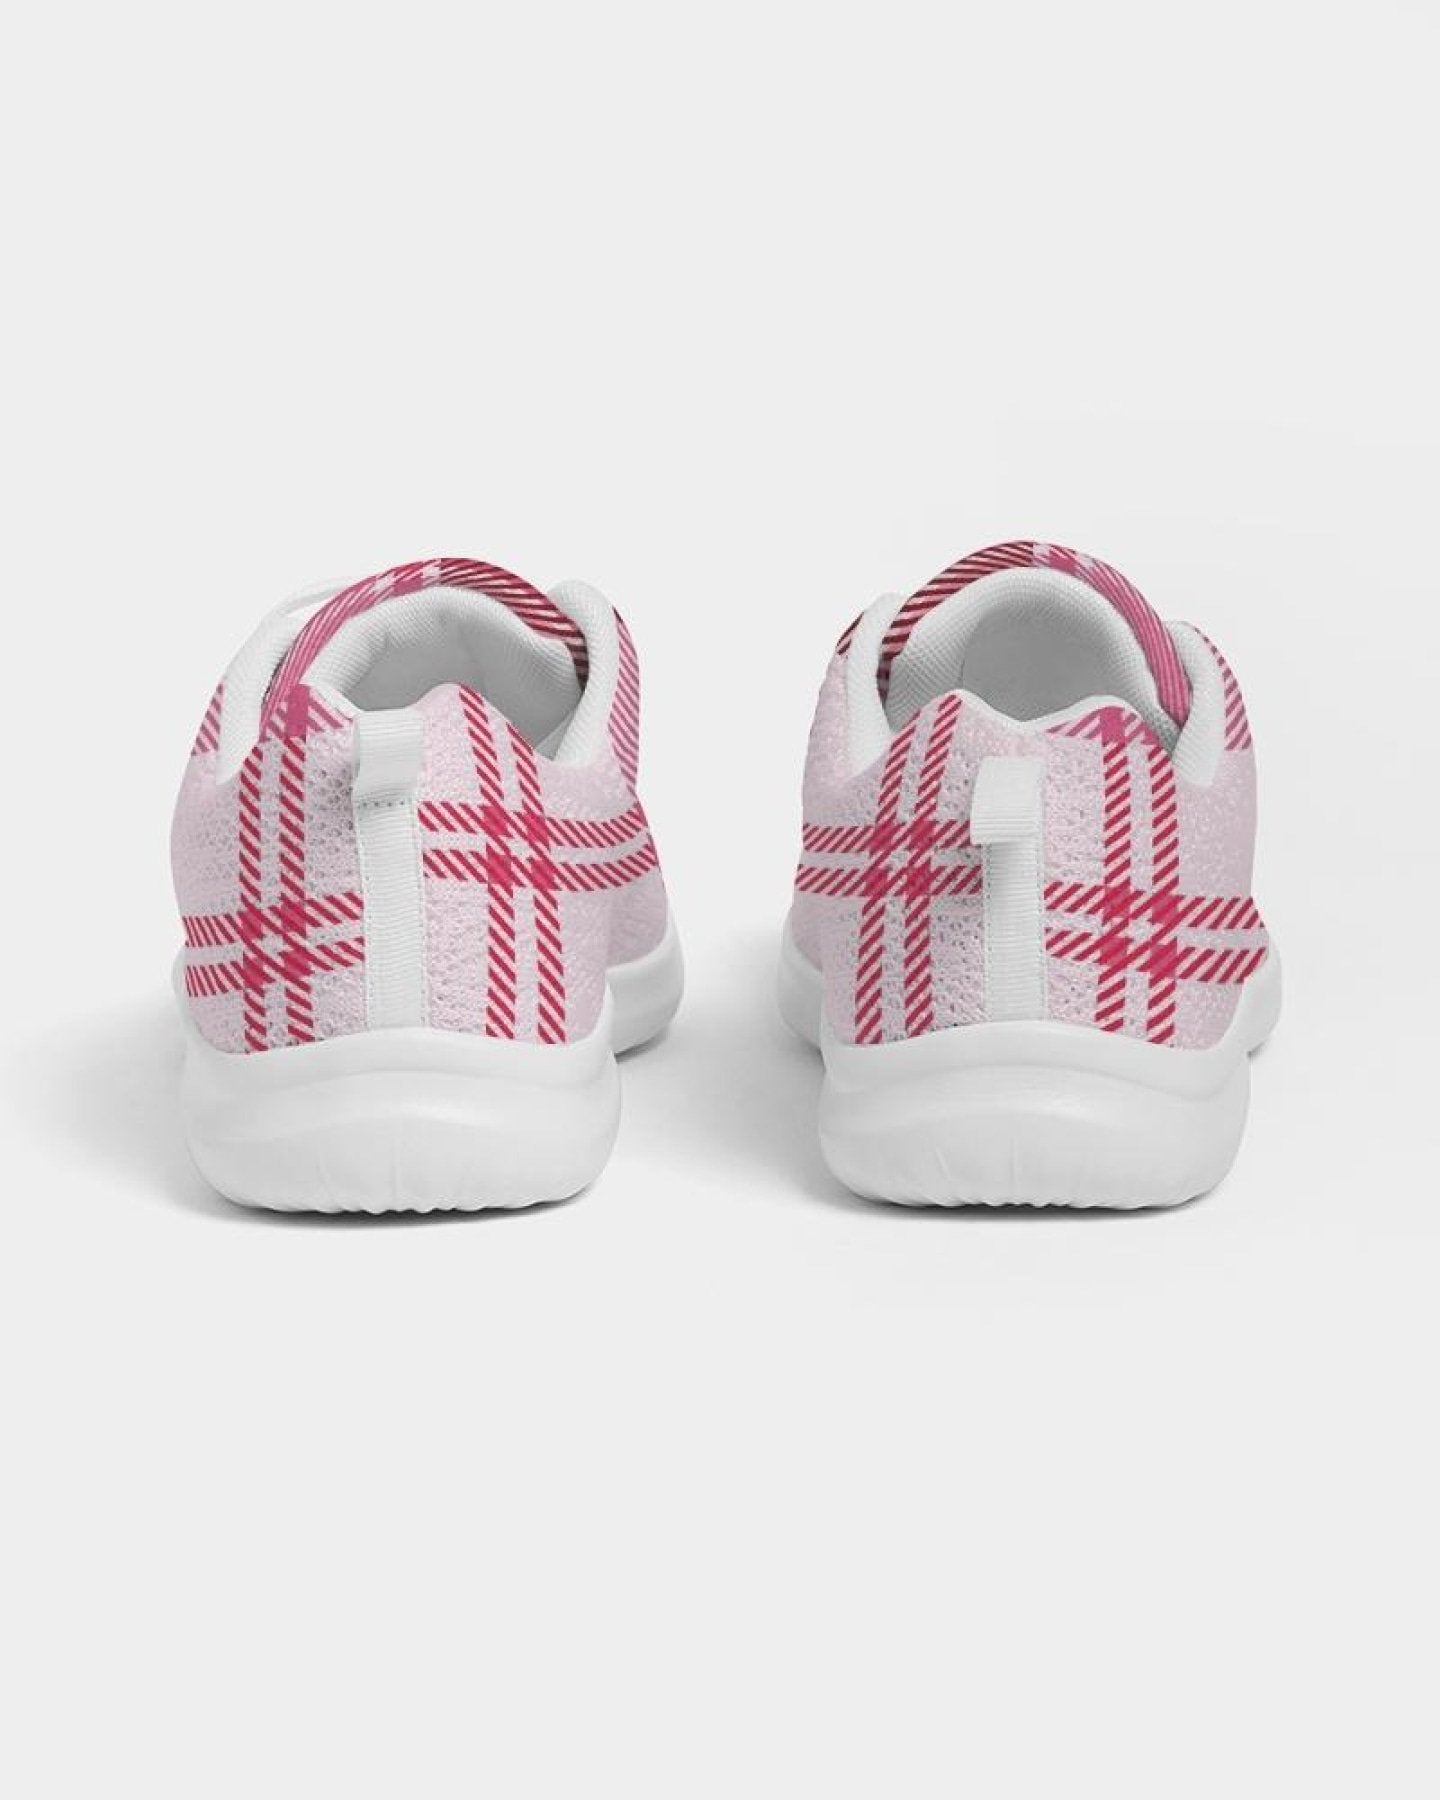 Womens Sneakers - Pink and White Plaid Running Sports Shoes